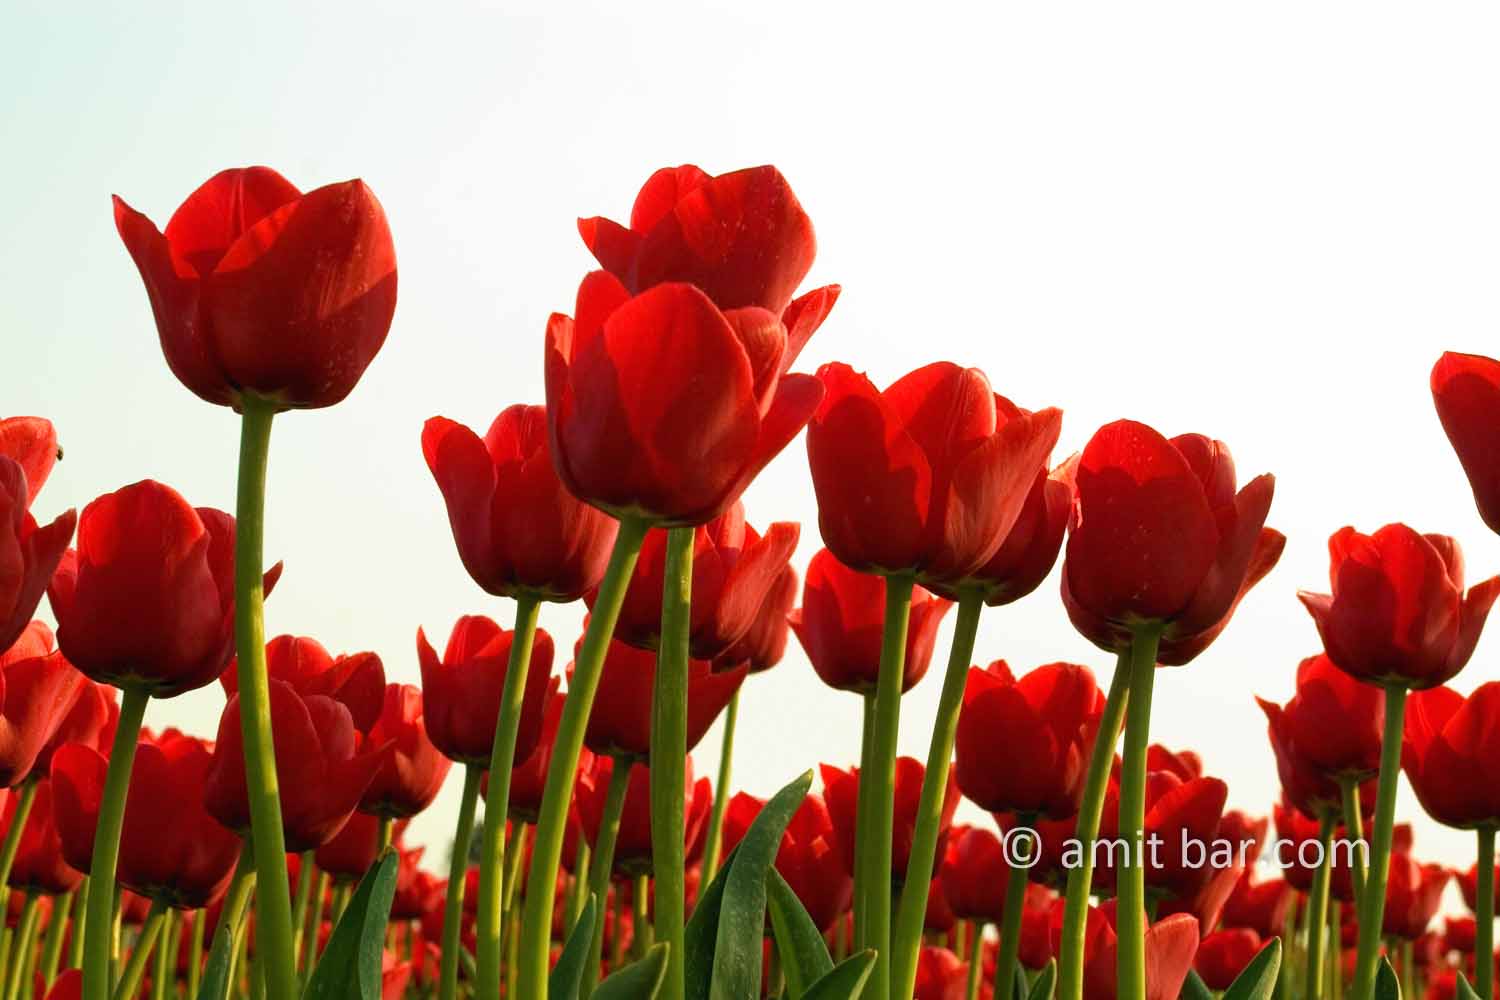 Dutch Spring: Red tulips I: Red tulips in spring field